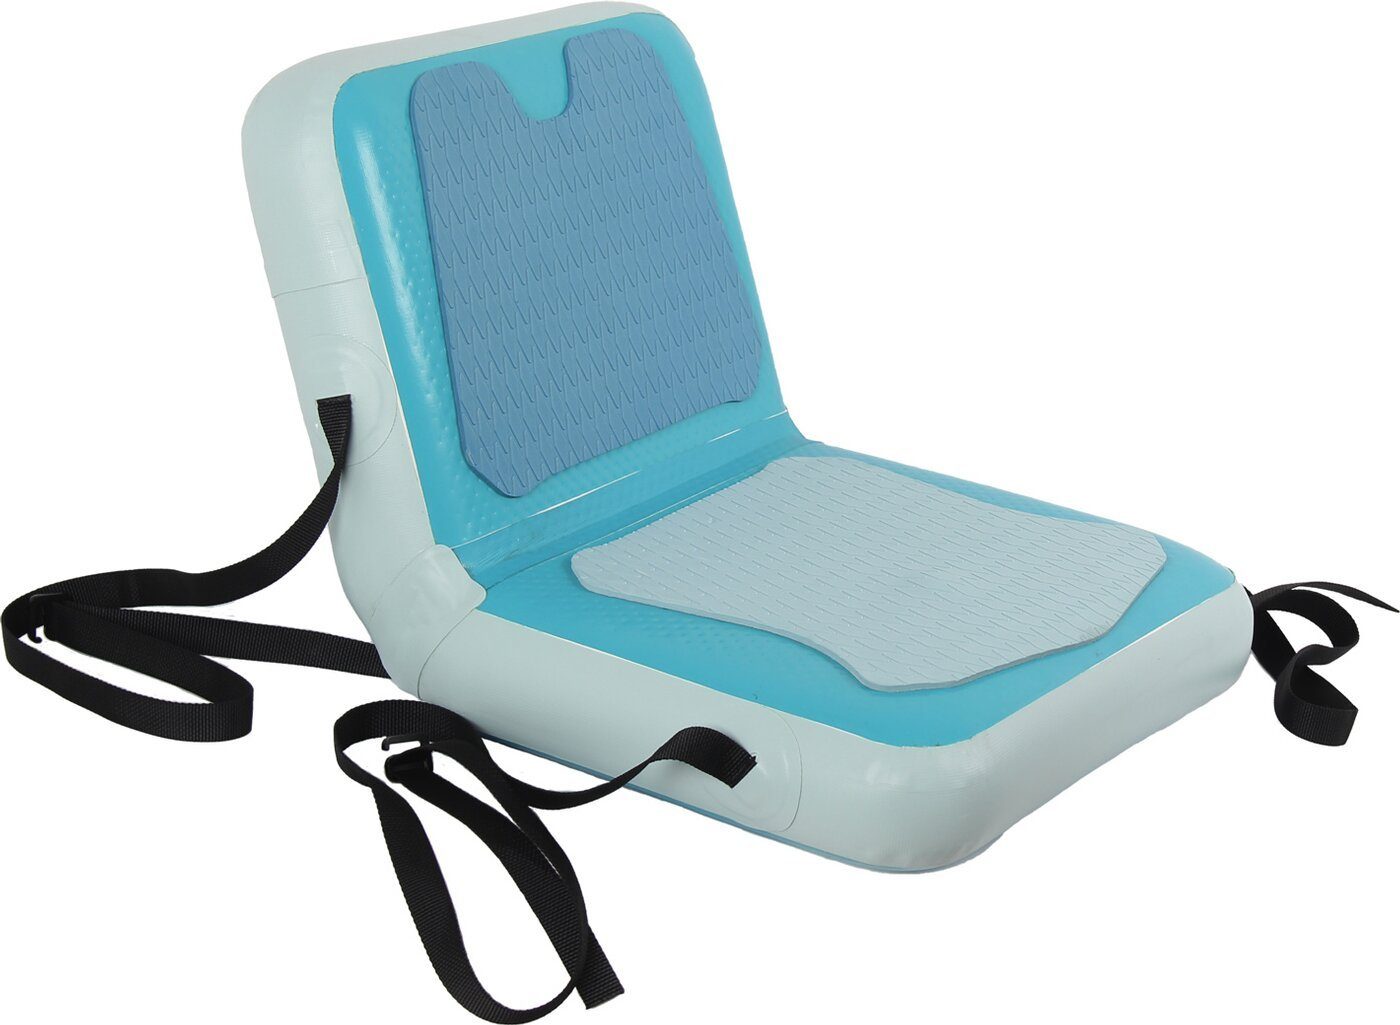 FIREFLY SUP-Pumpe SUP-Zubehör SUP Inflatable Seat